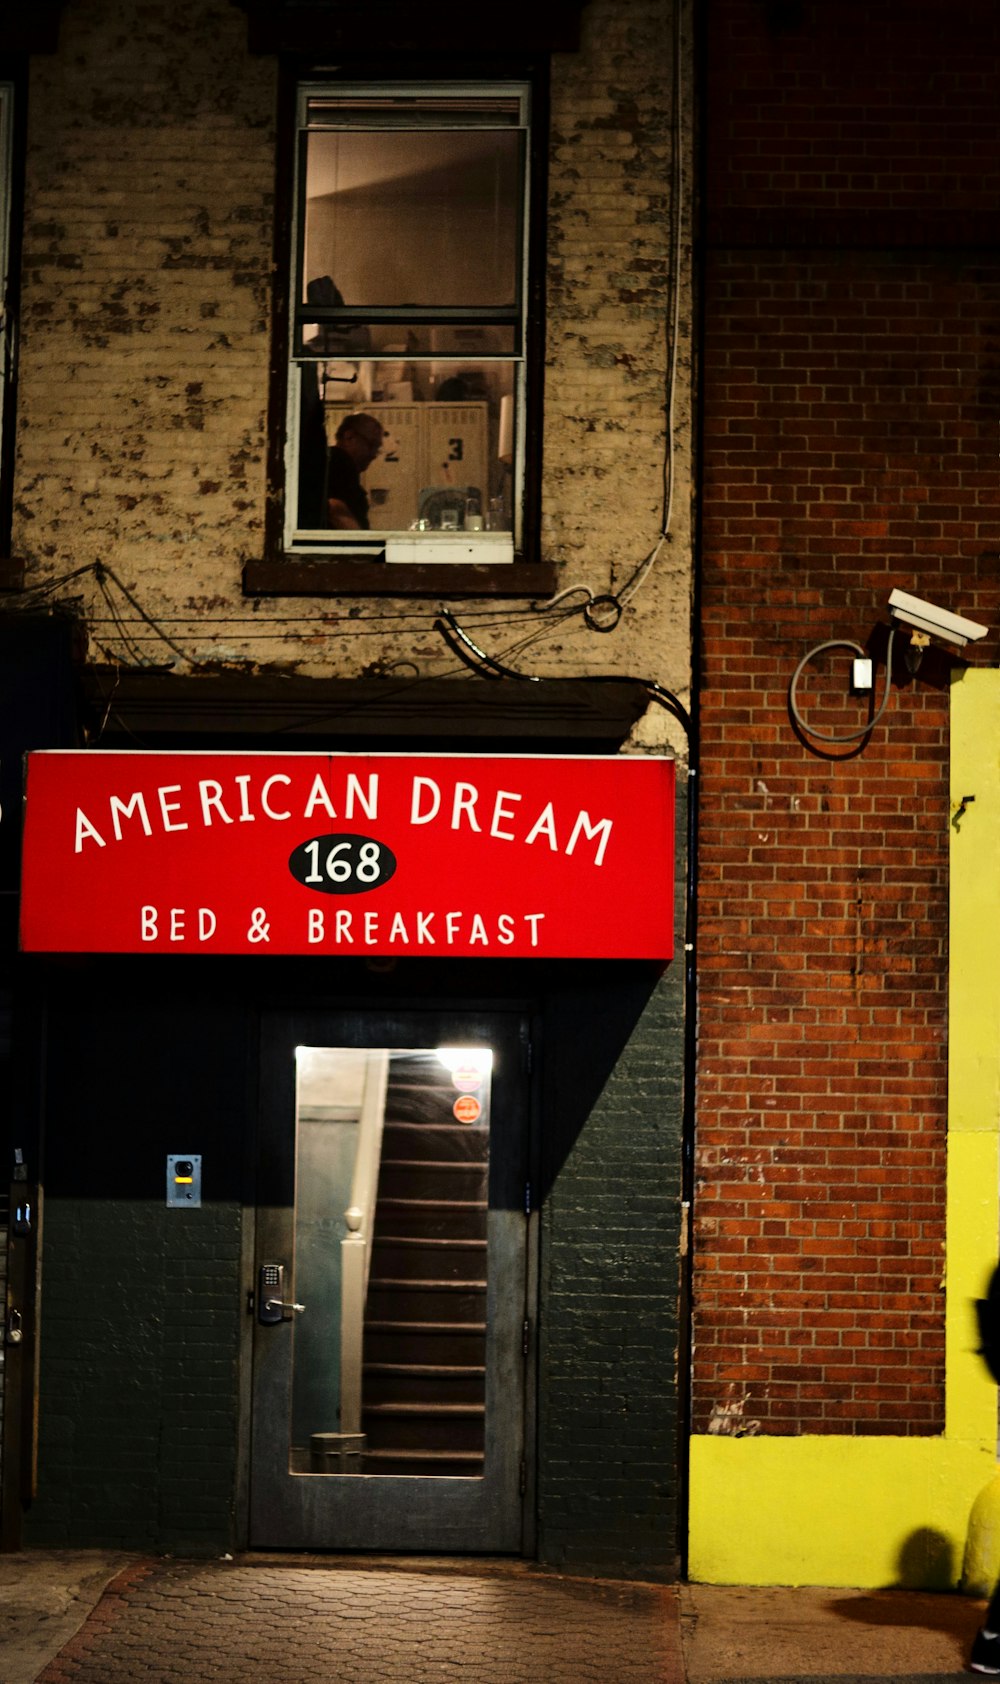 American Dream 168 bed & breakfast restaurant during night time